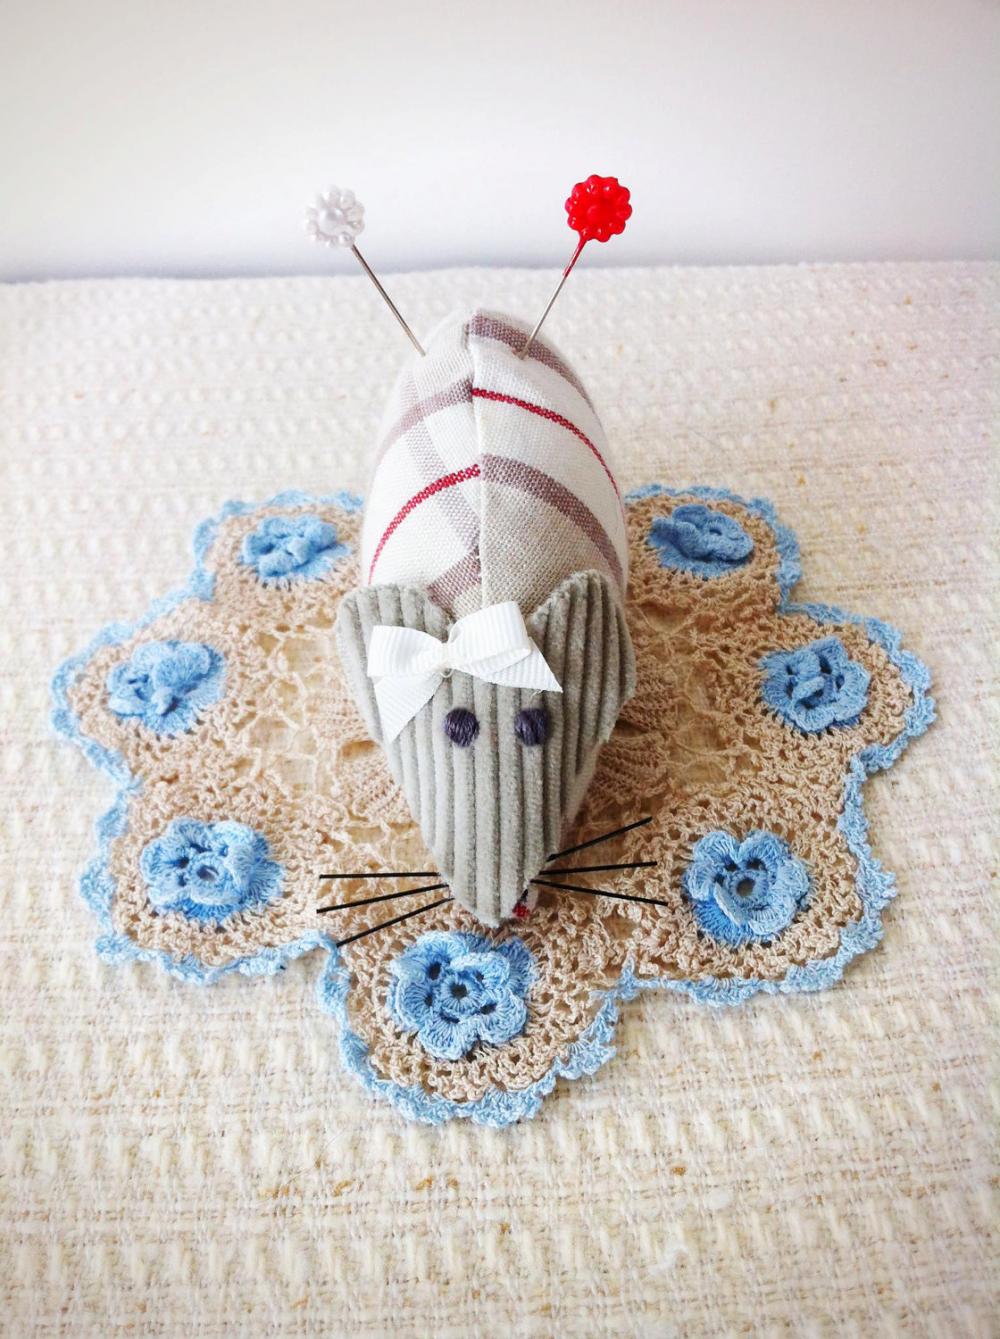 Hattie The Mouse Handmade Pincushion, With Cream And Red Tartan Body, And Cute Little Flower Pins.